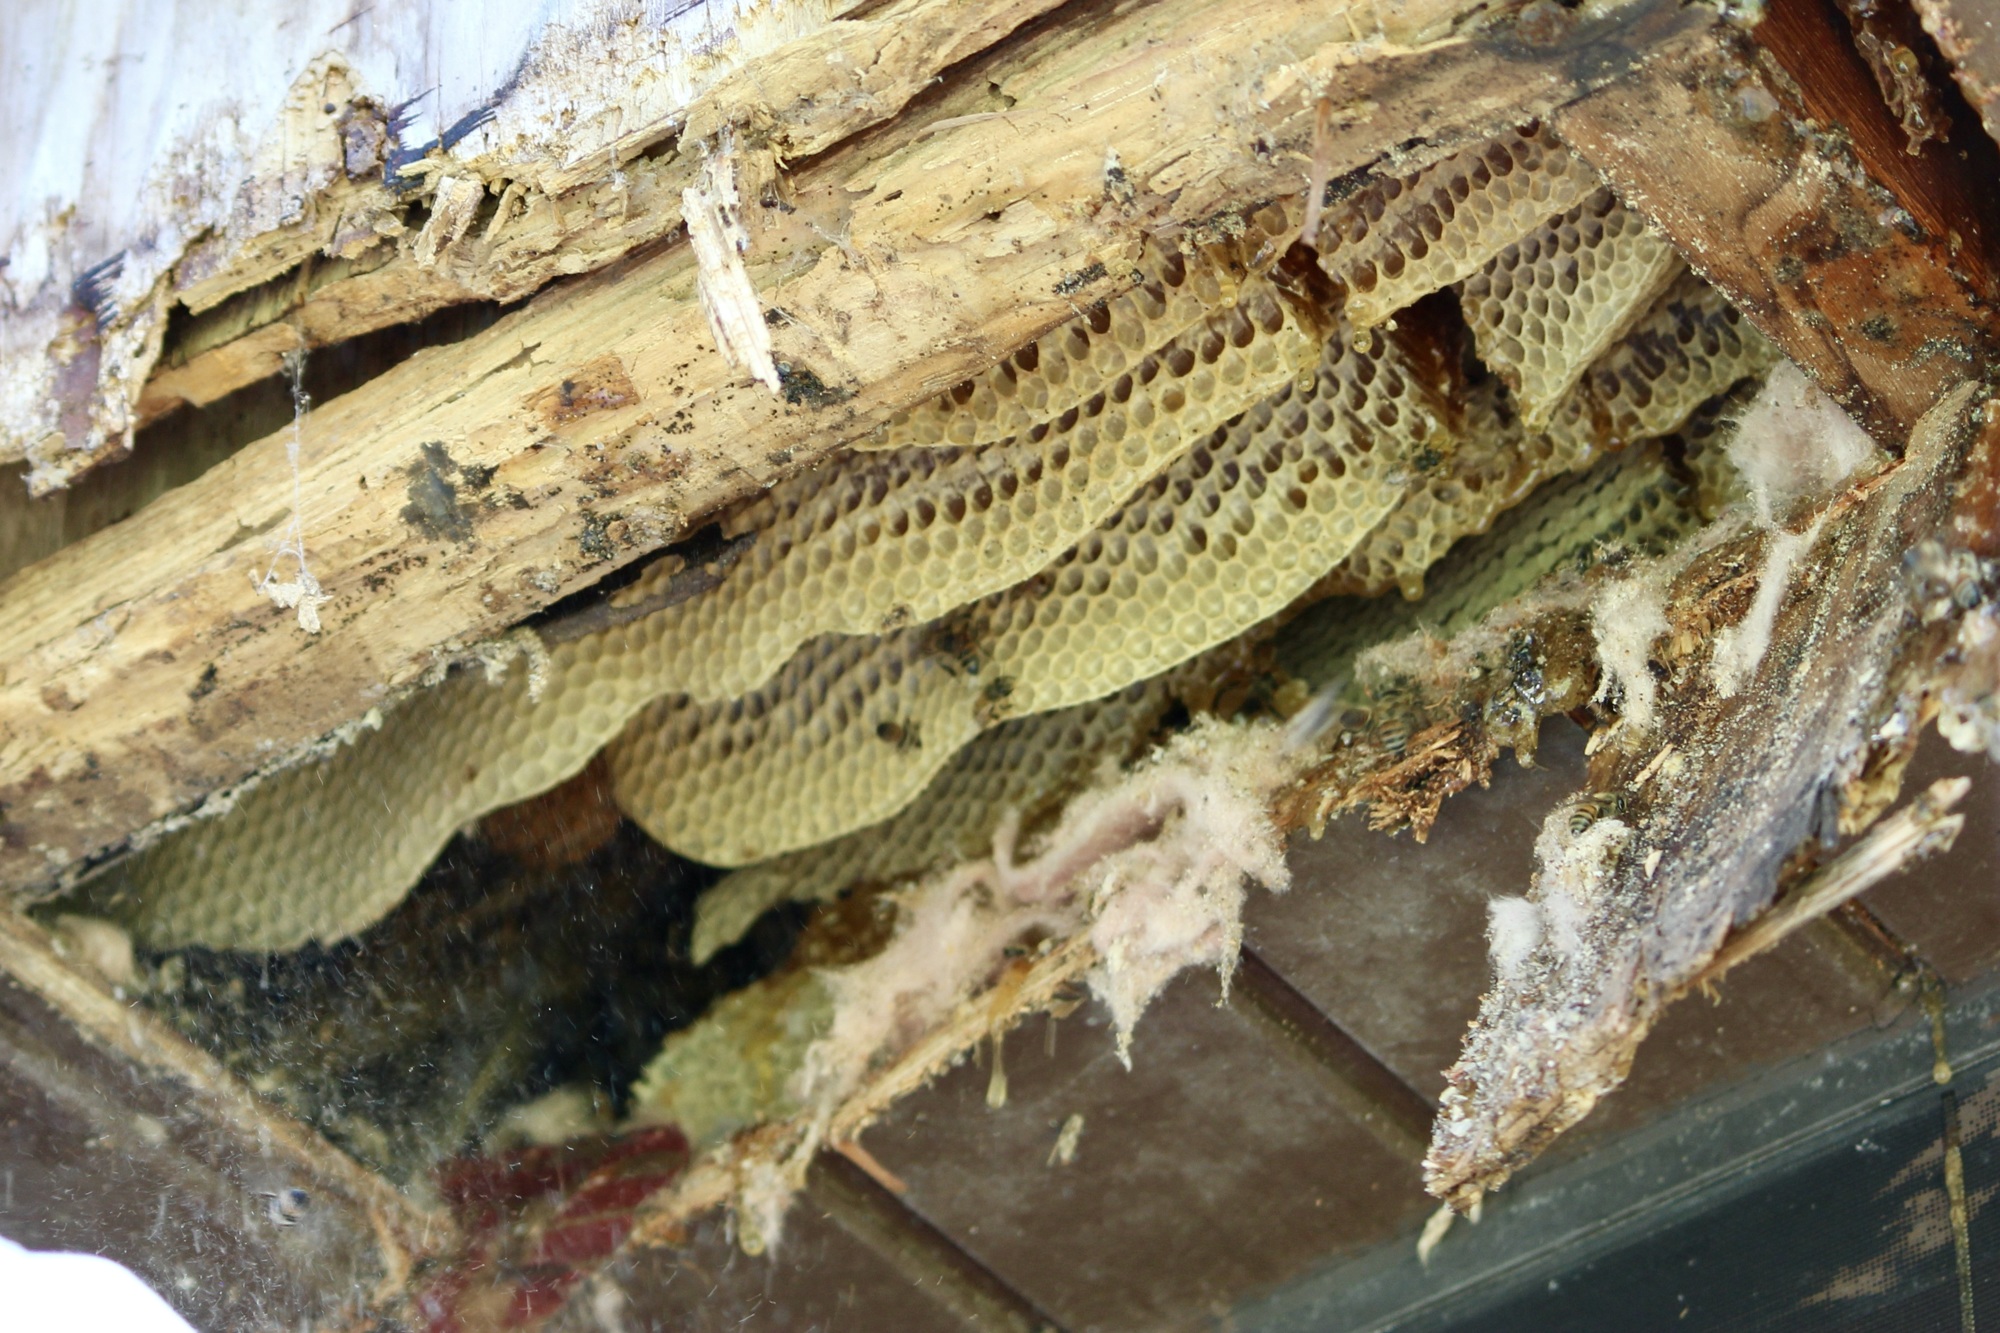 A bee hive takes over a soffit on Longboat Key. (Photo by Lesley Dwyer)